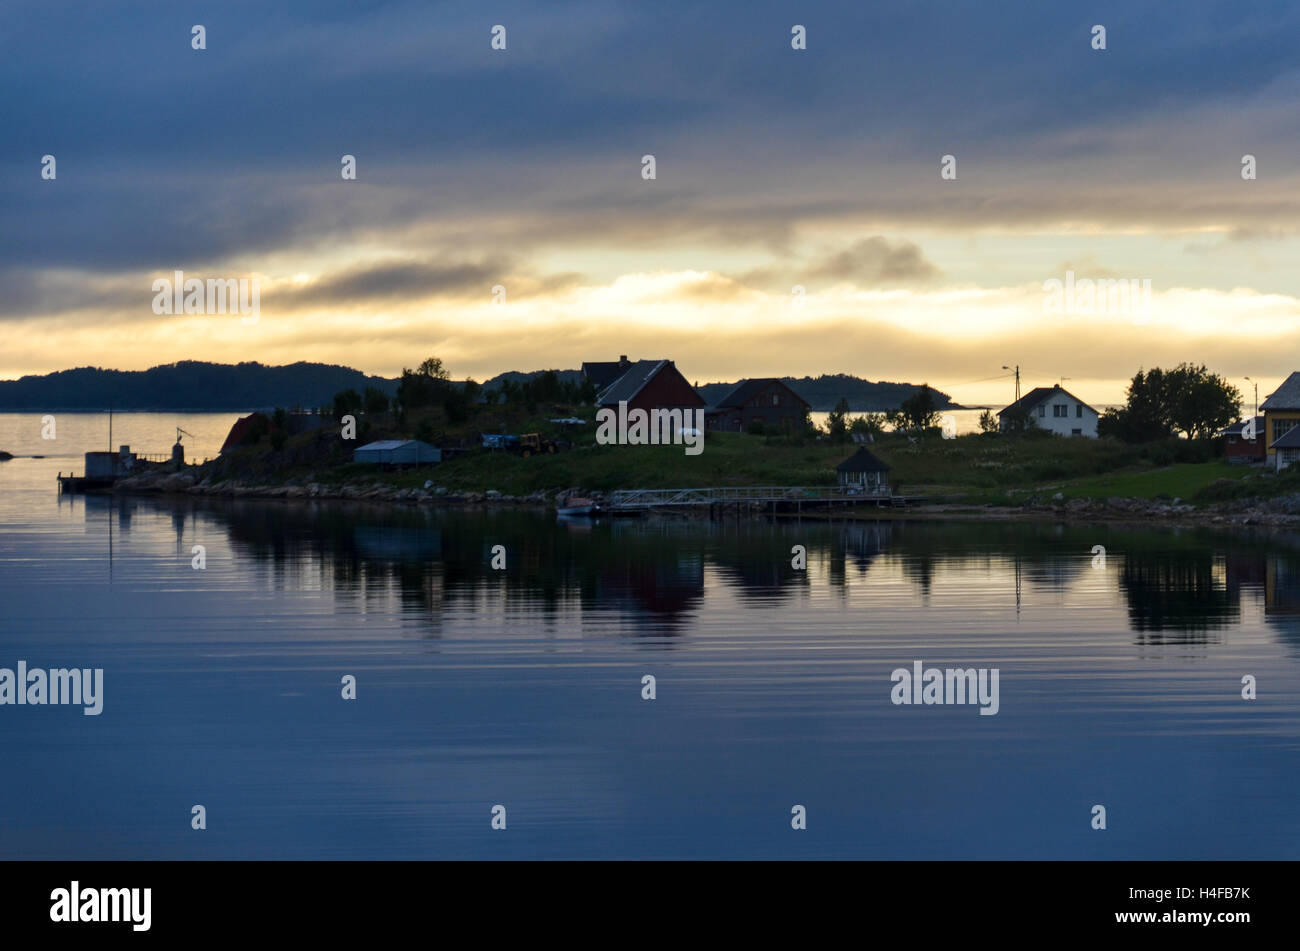 Cloudy sunset at midnight over a few houses on the island of Senja, Northern Norway Stock Photo